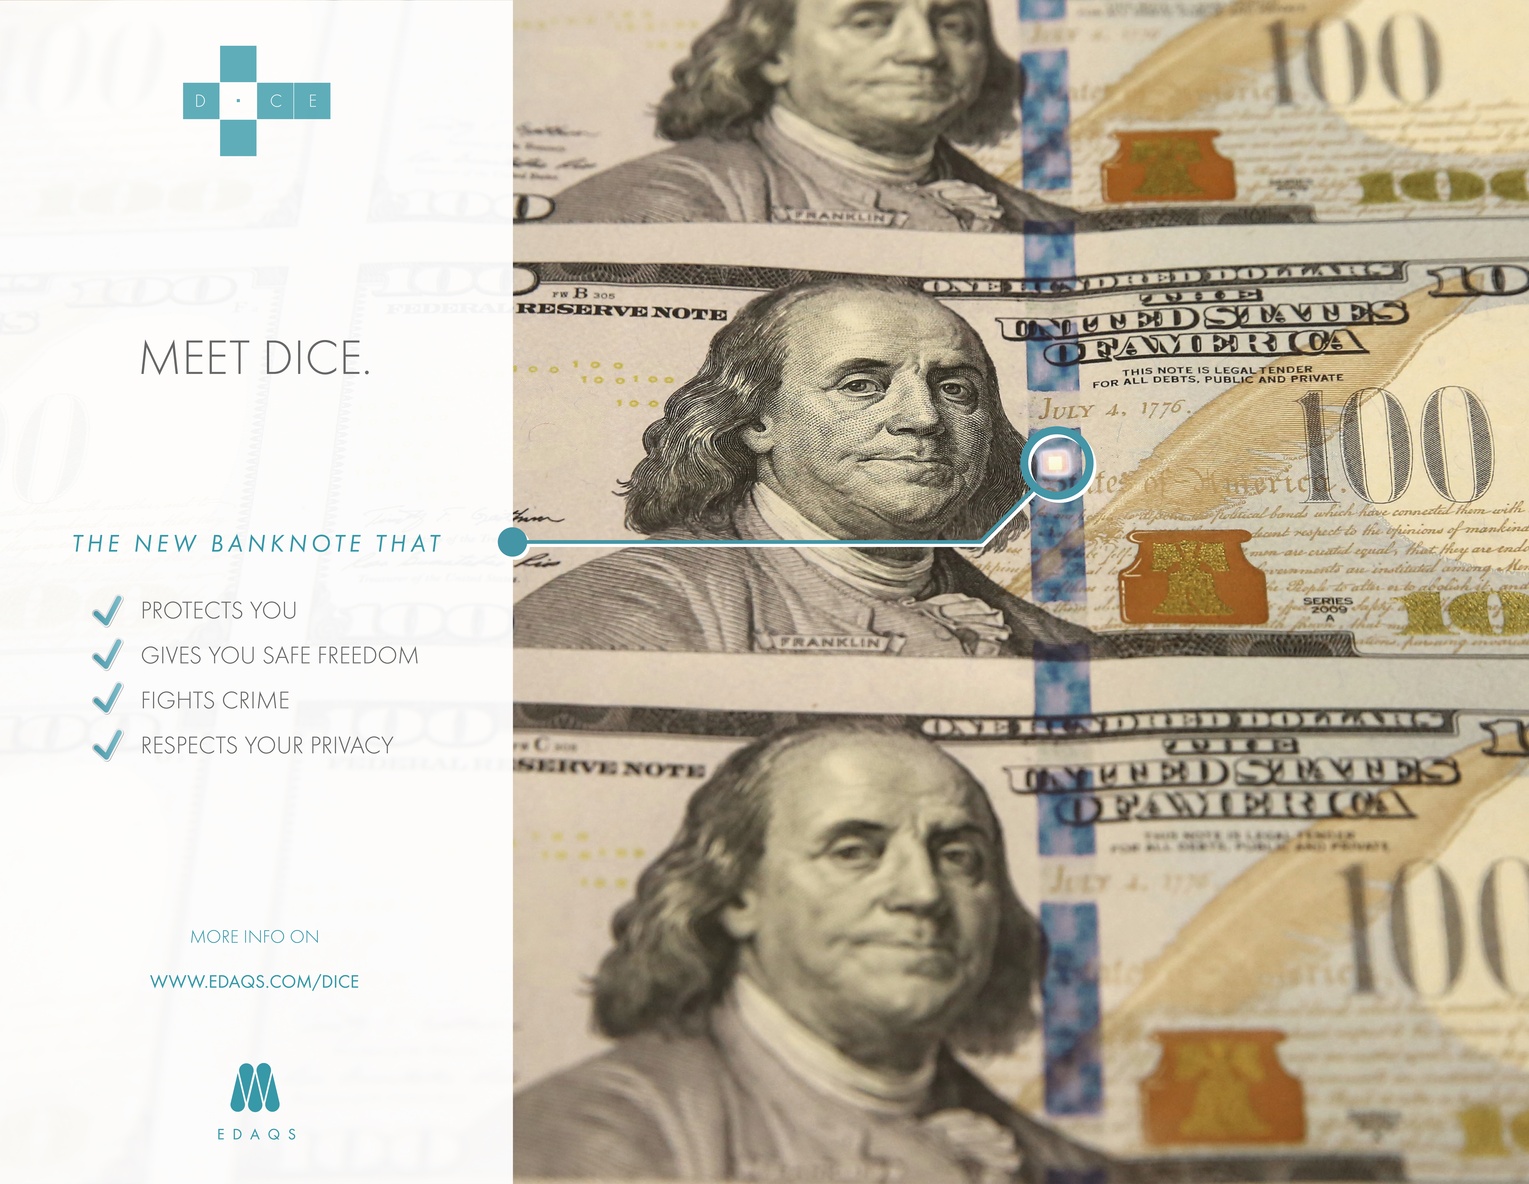 DICE – the new banknote technology that protects citizen and fights the crime